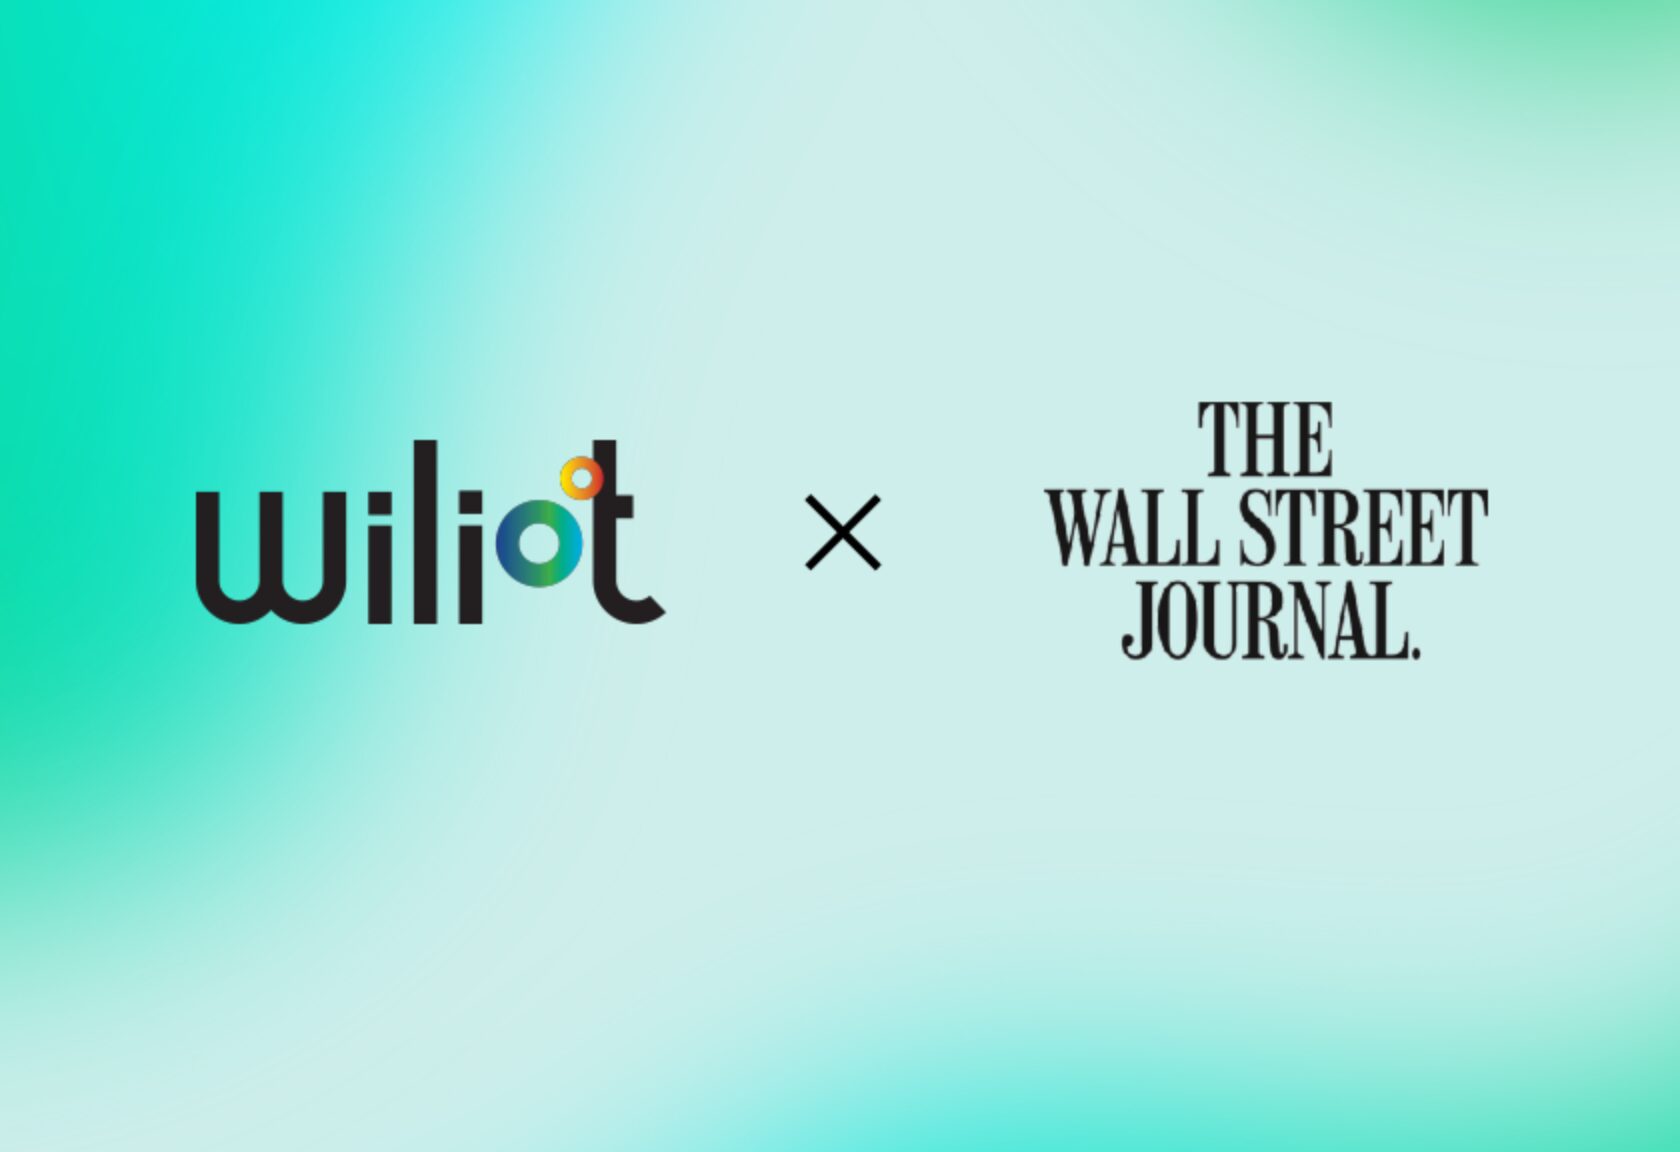 The Wall Street Journal Features Wiliot - Ambient 'is coming, and it promises to change how we interact with the world.’